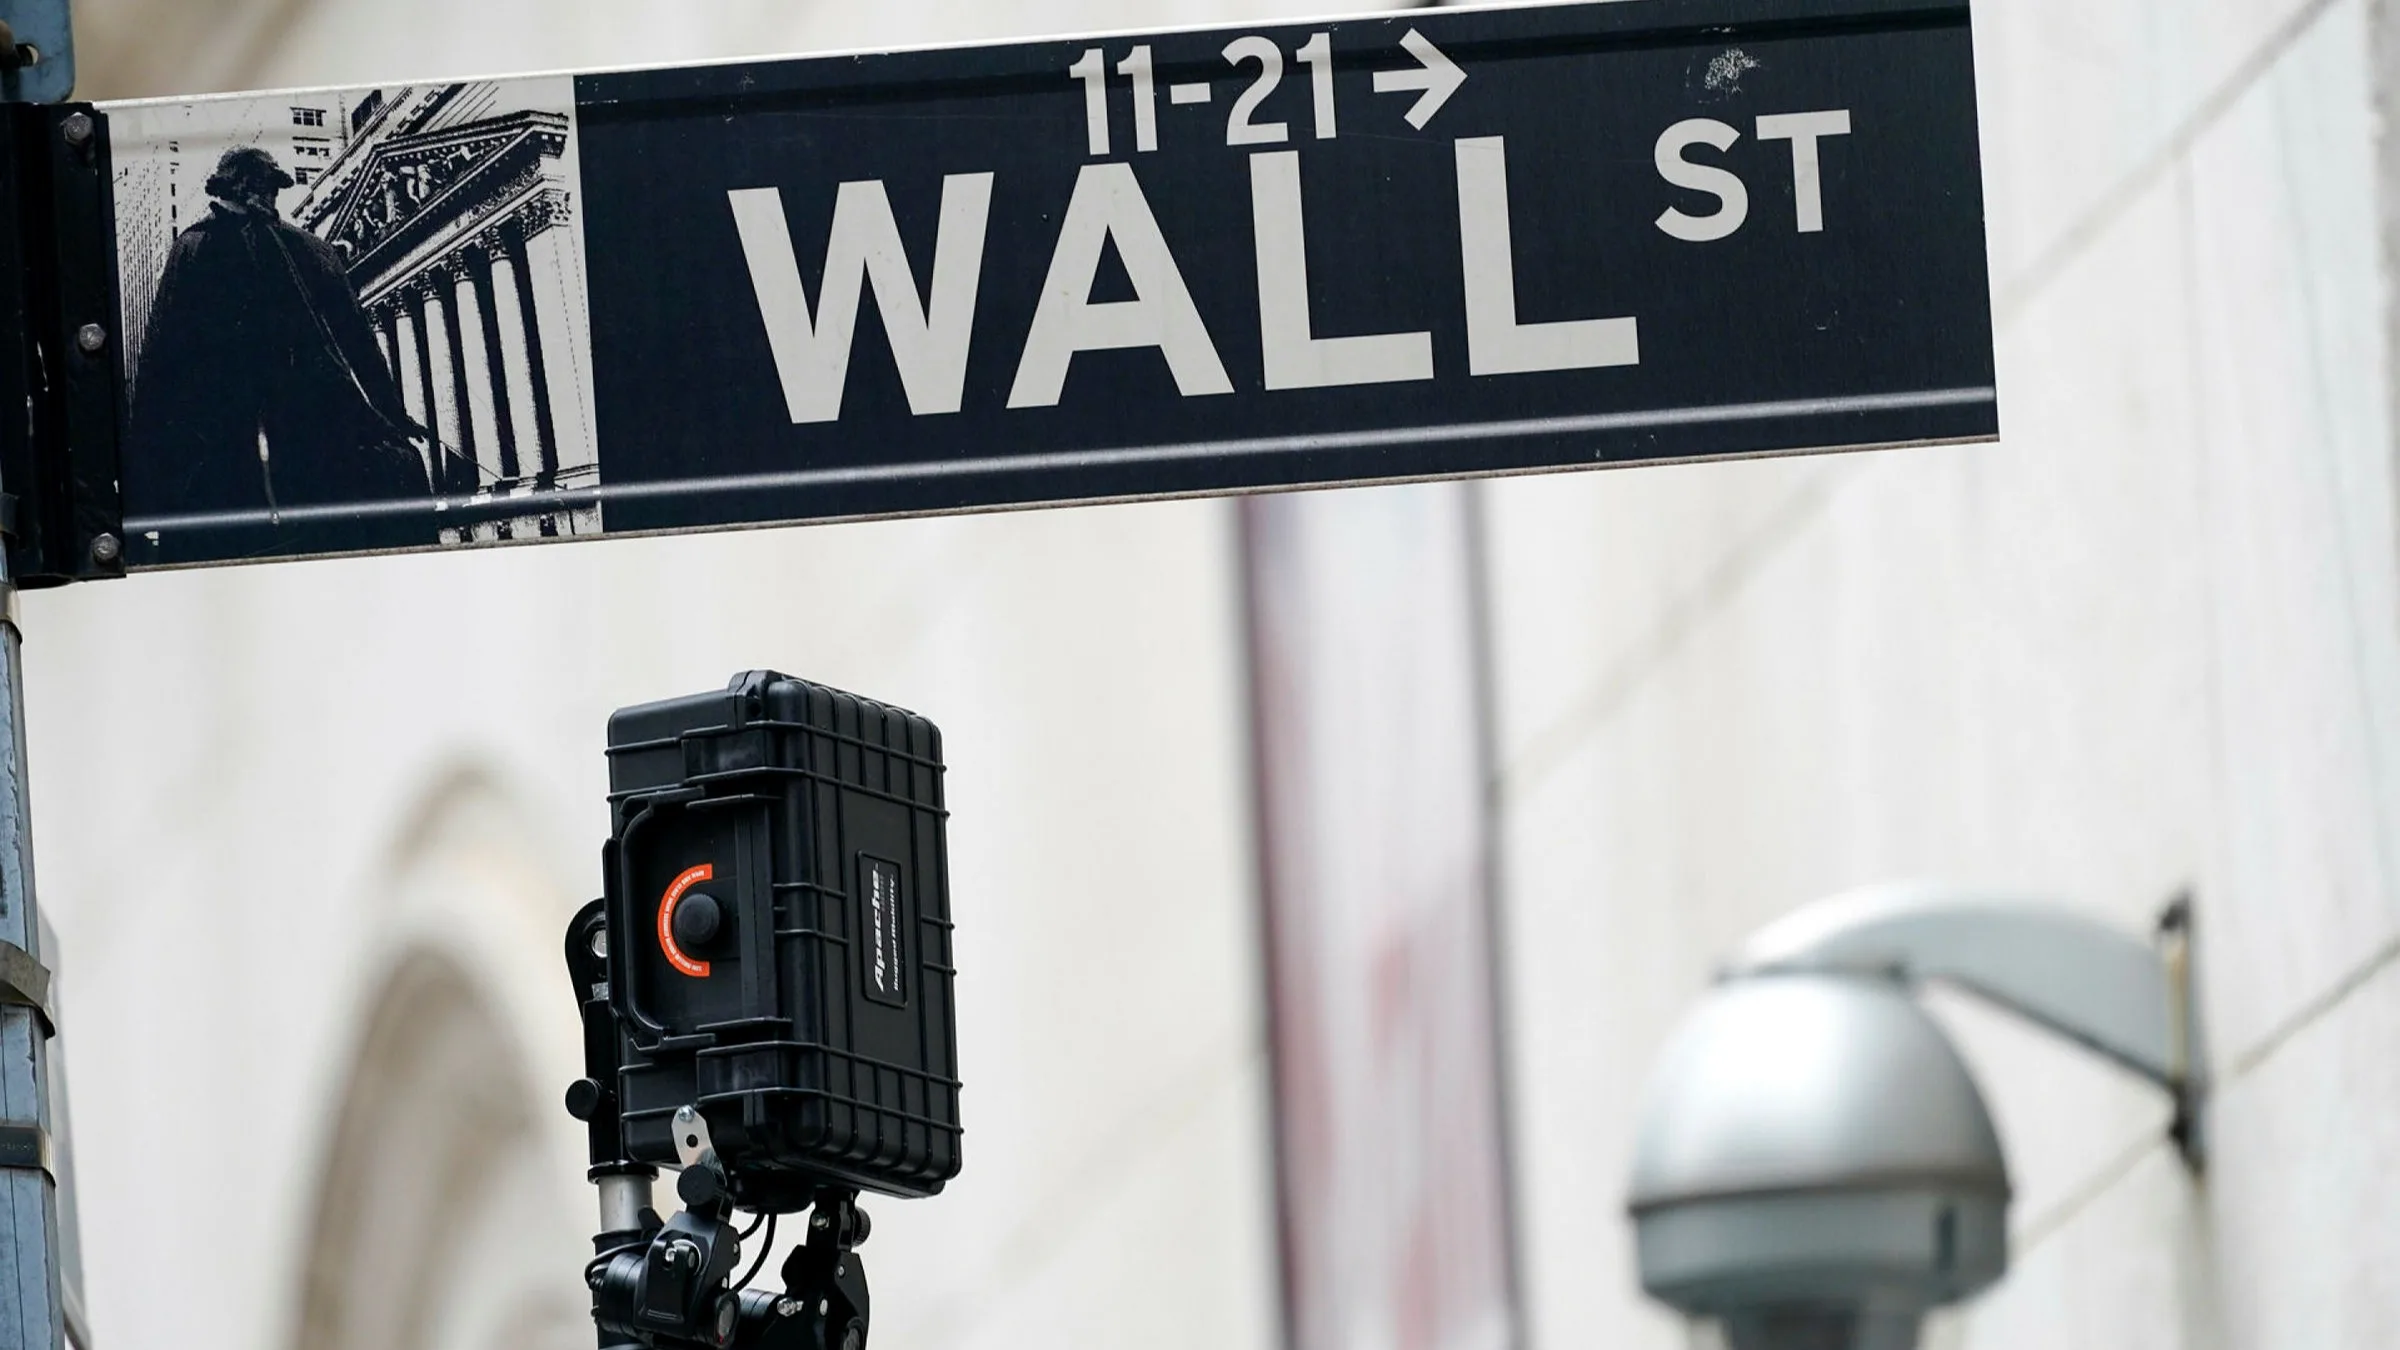 Rising energy prices dampened sentiment on Wall Street